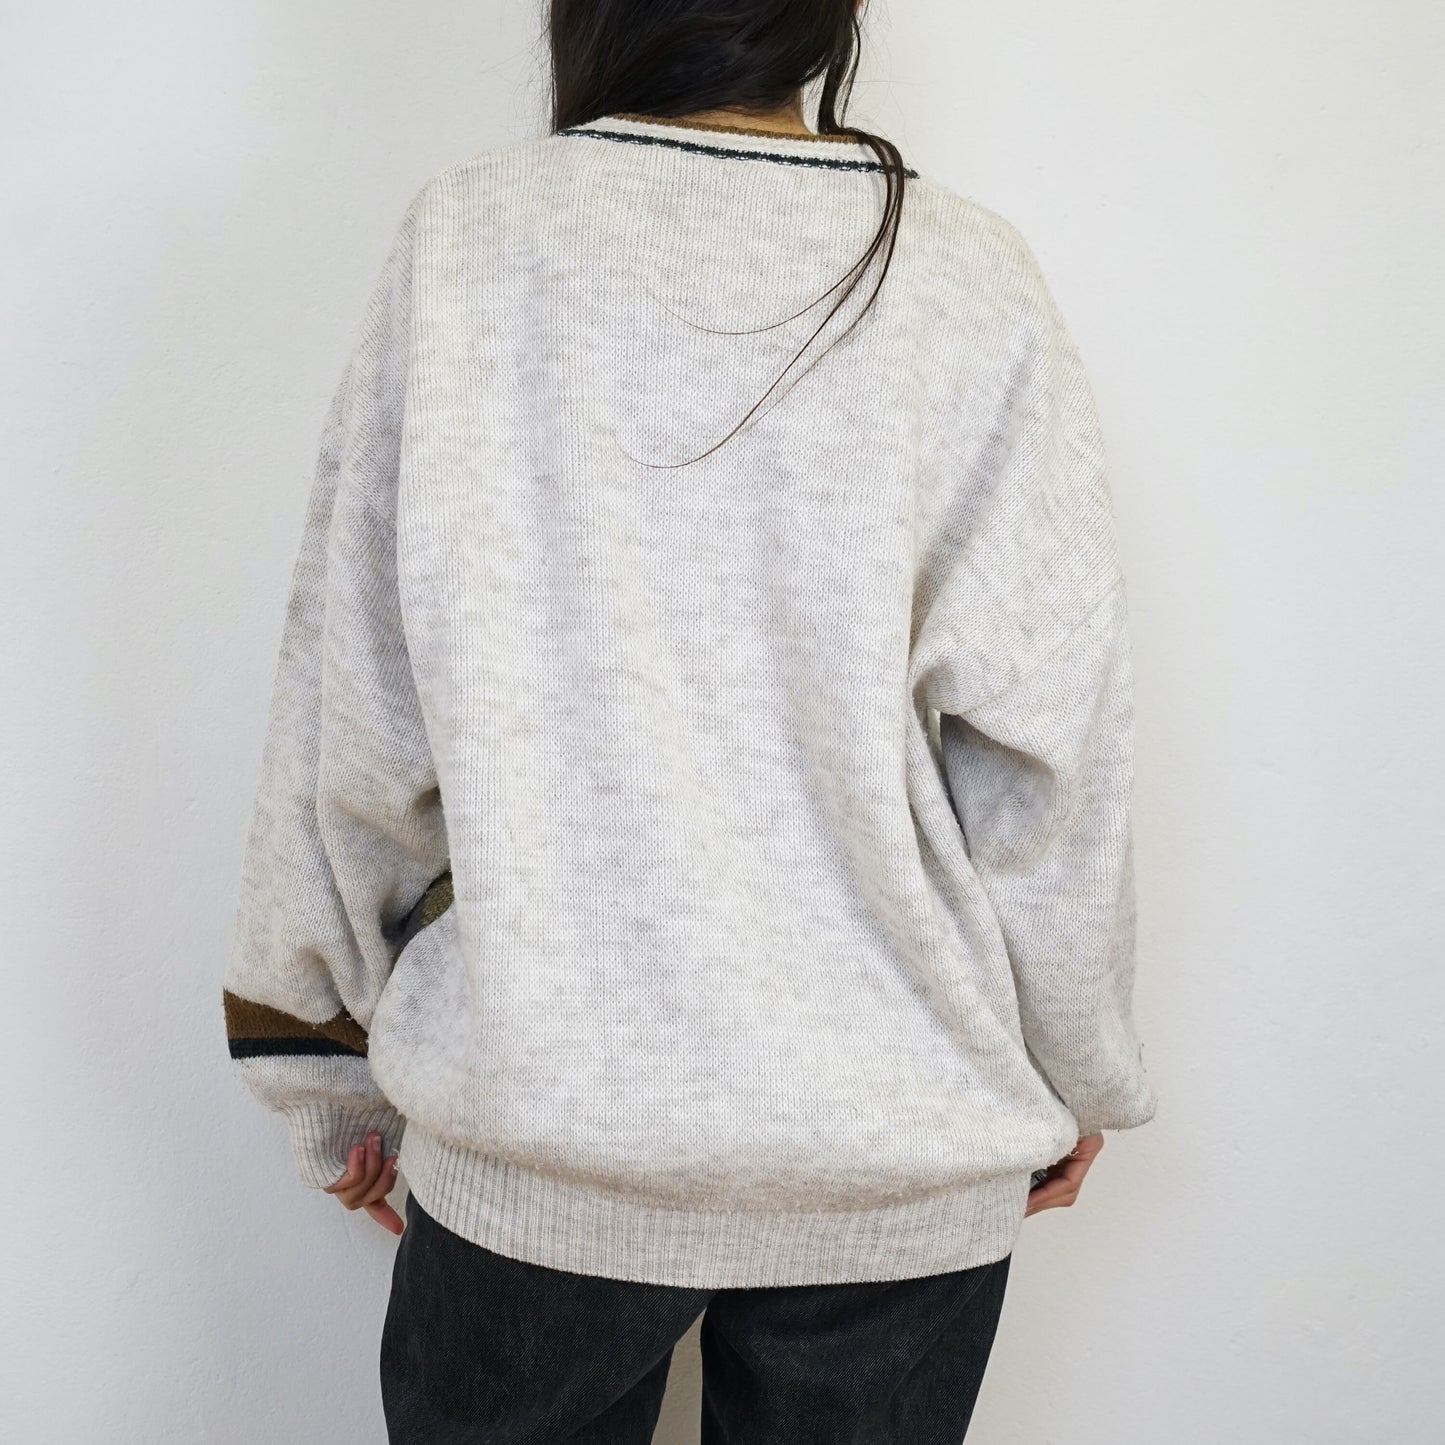 Vintage Pullover Size L-XL white brown embroidery